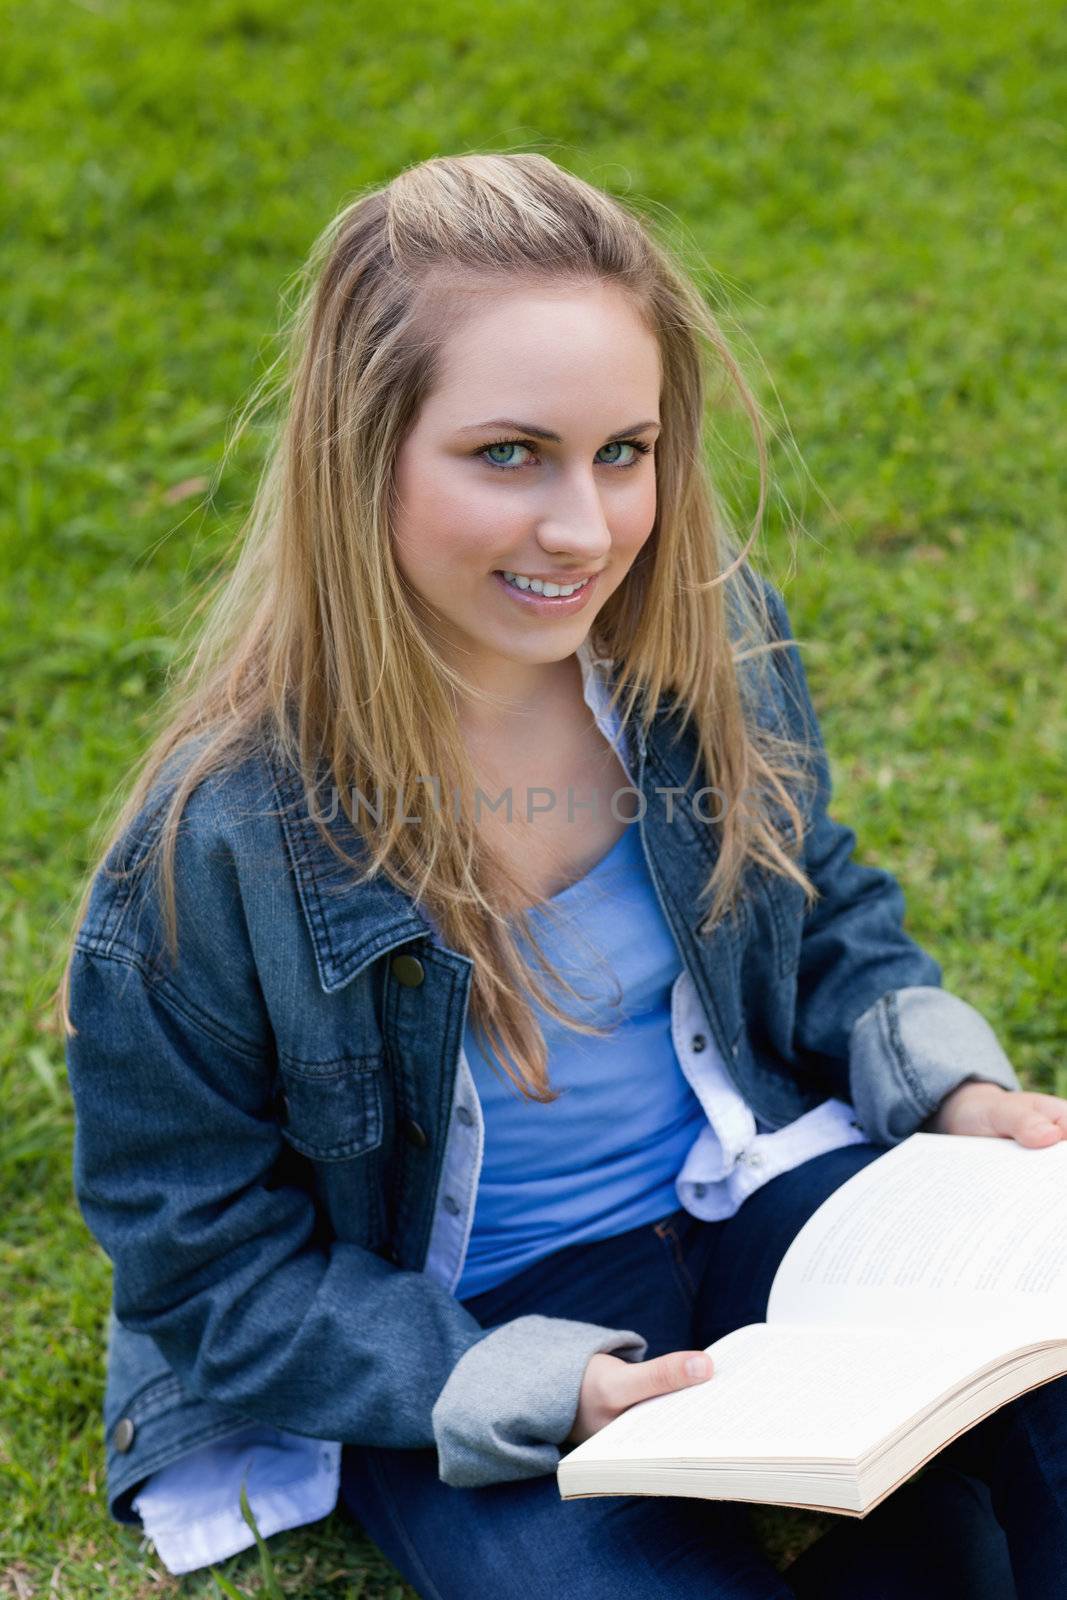 Young woman looking at the camera while holding a book and sitting on the grass